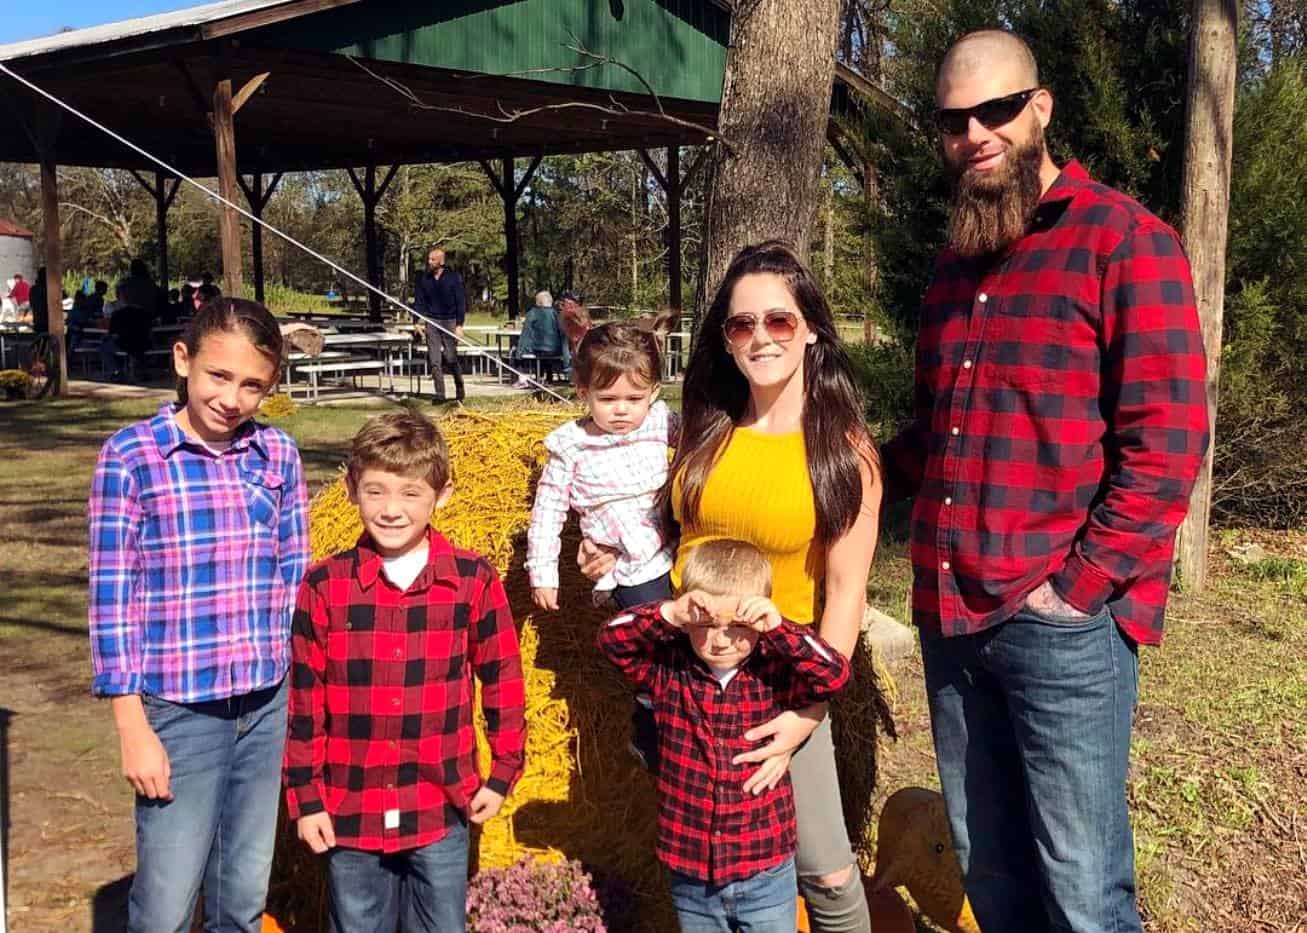 Jenelle Evans and David Eason No Longer Want Custody of His Daughter Maryssa After She Snubbed David During Visitation, Plus Jenelle Drops Bid For Unsupervised Visits With Jace